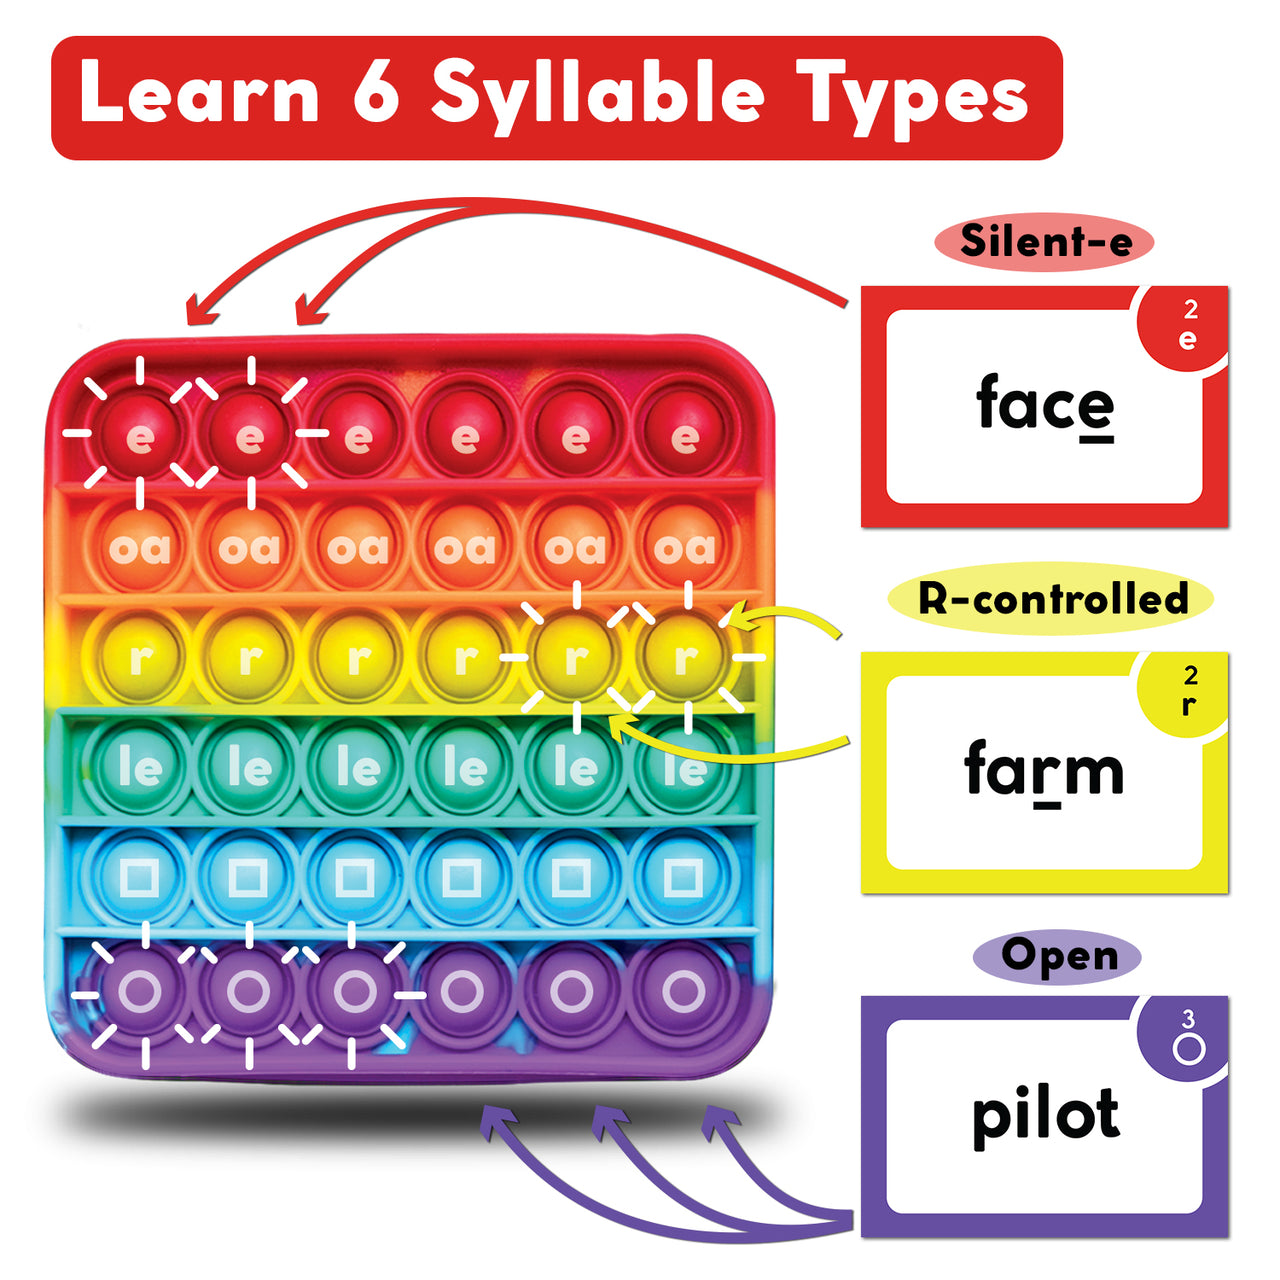 Learn 6 Syllable Types